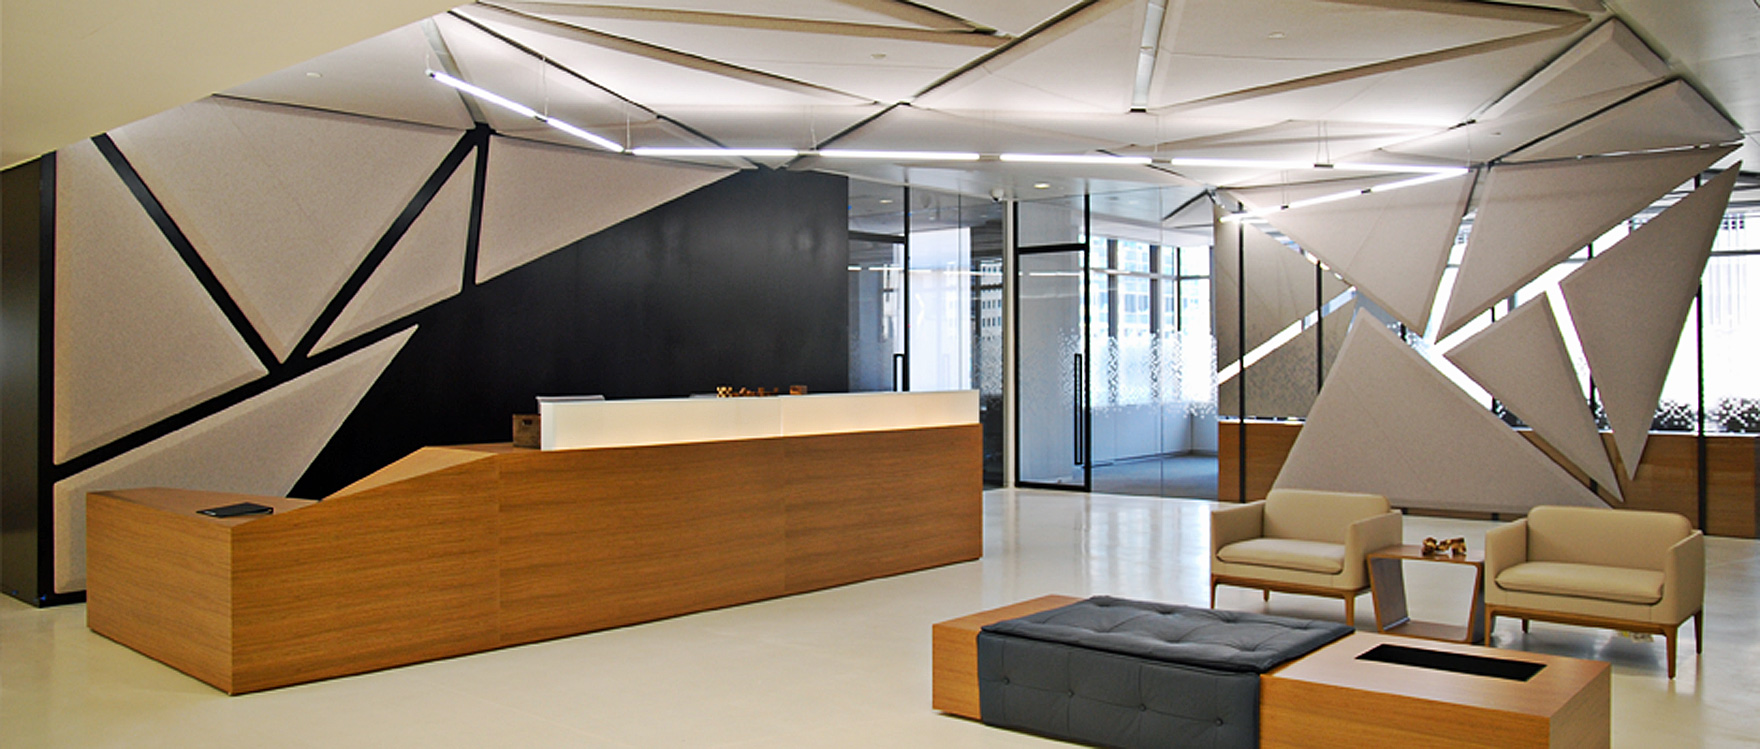 Wall and Ceiling Upholstered Panels in Reception Area